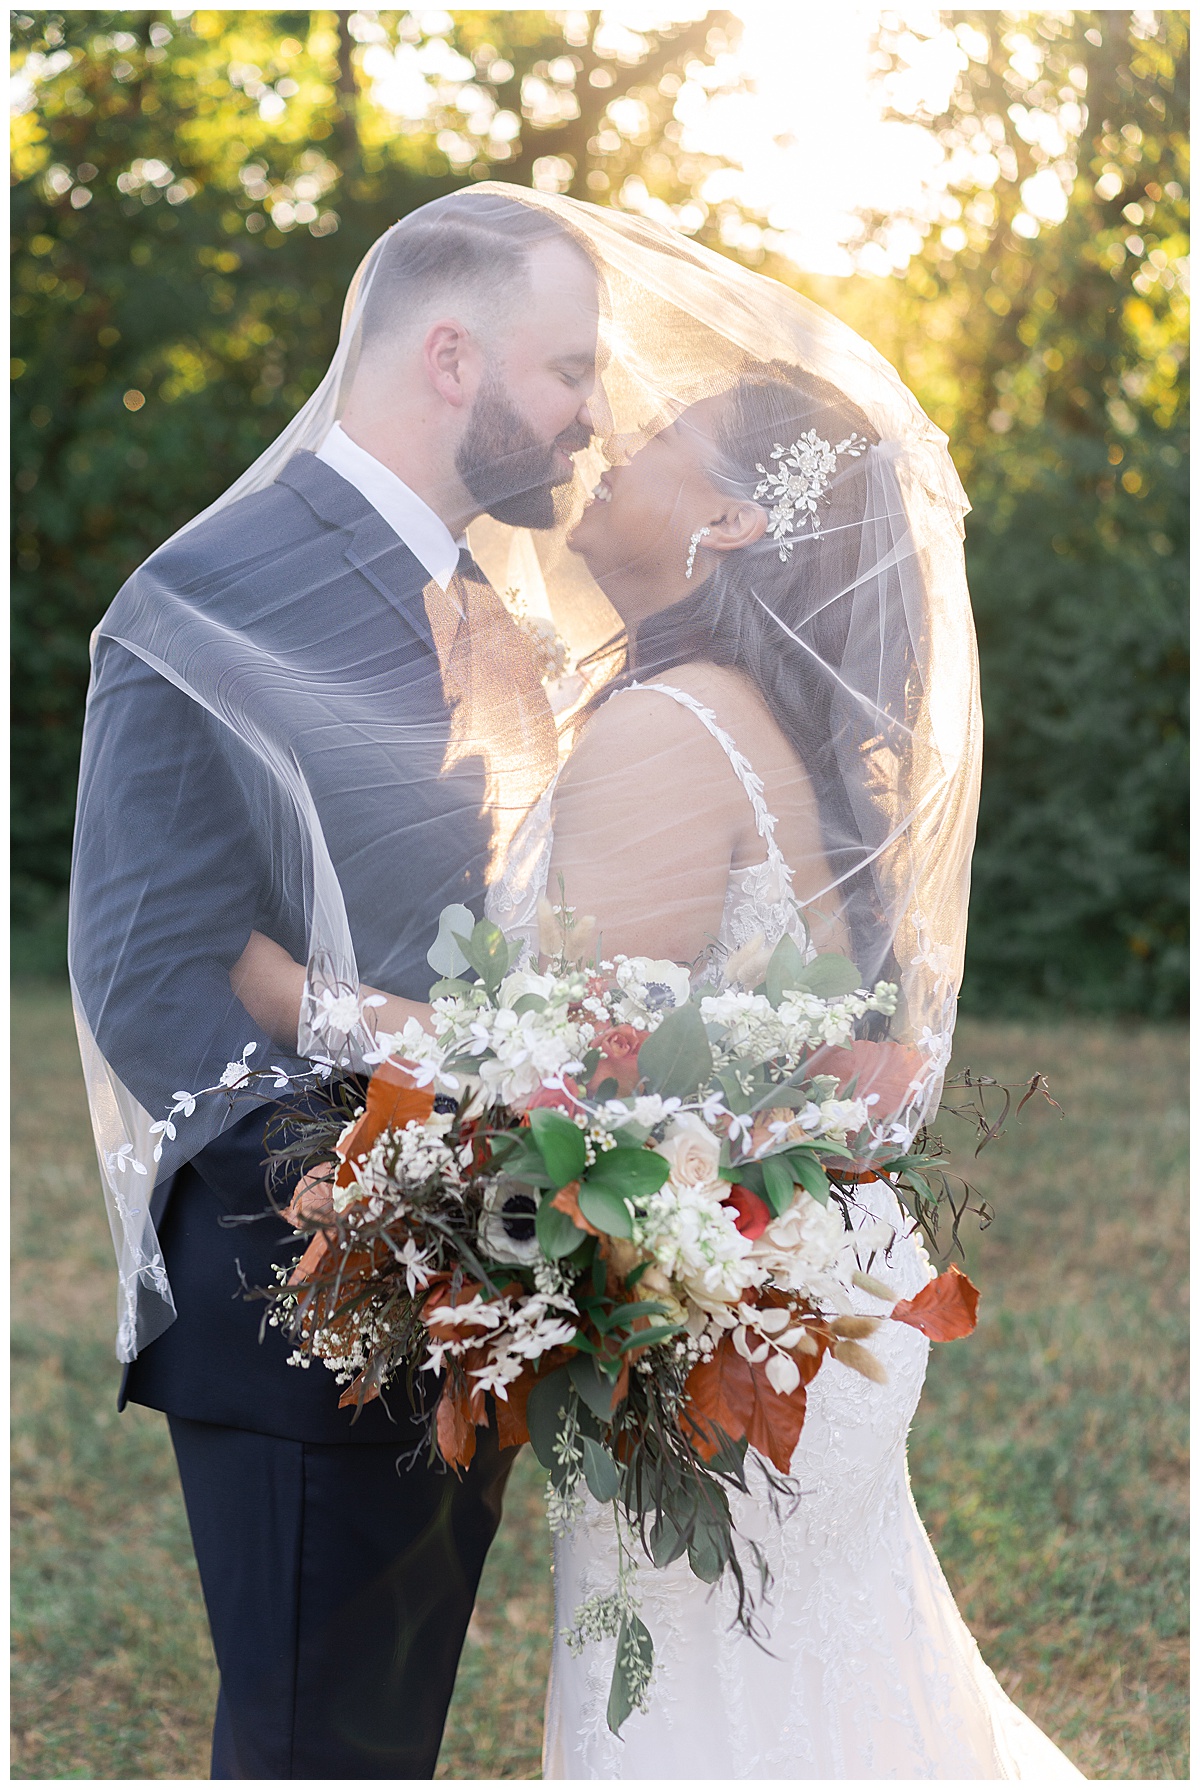 Couple smile together under veil at The Bowery House & Gardens